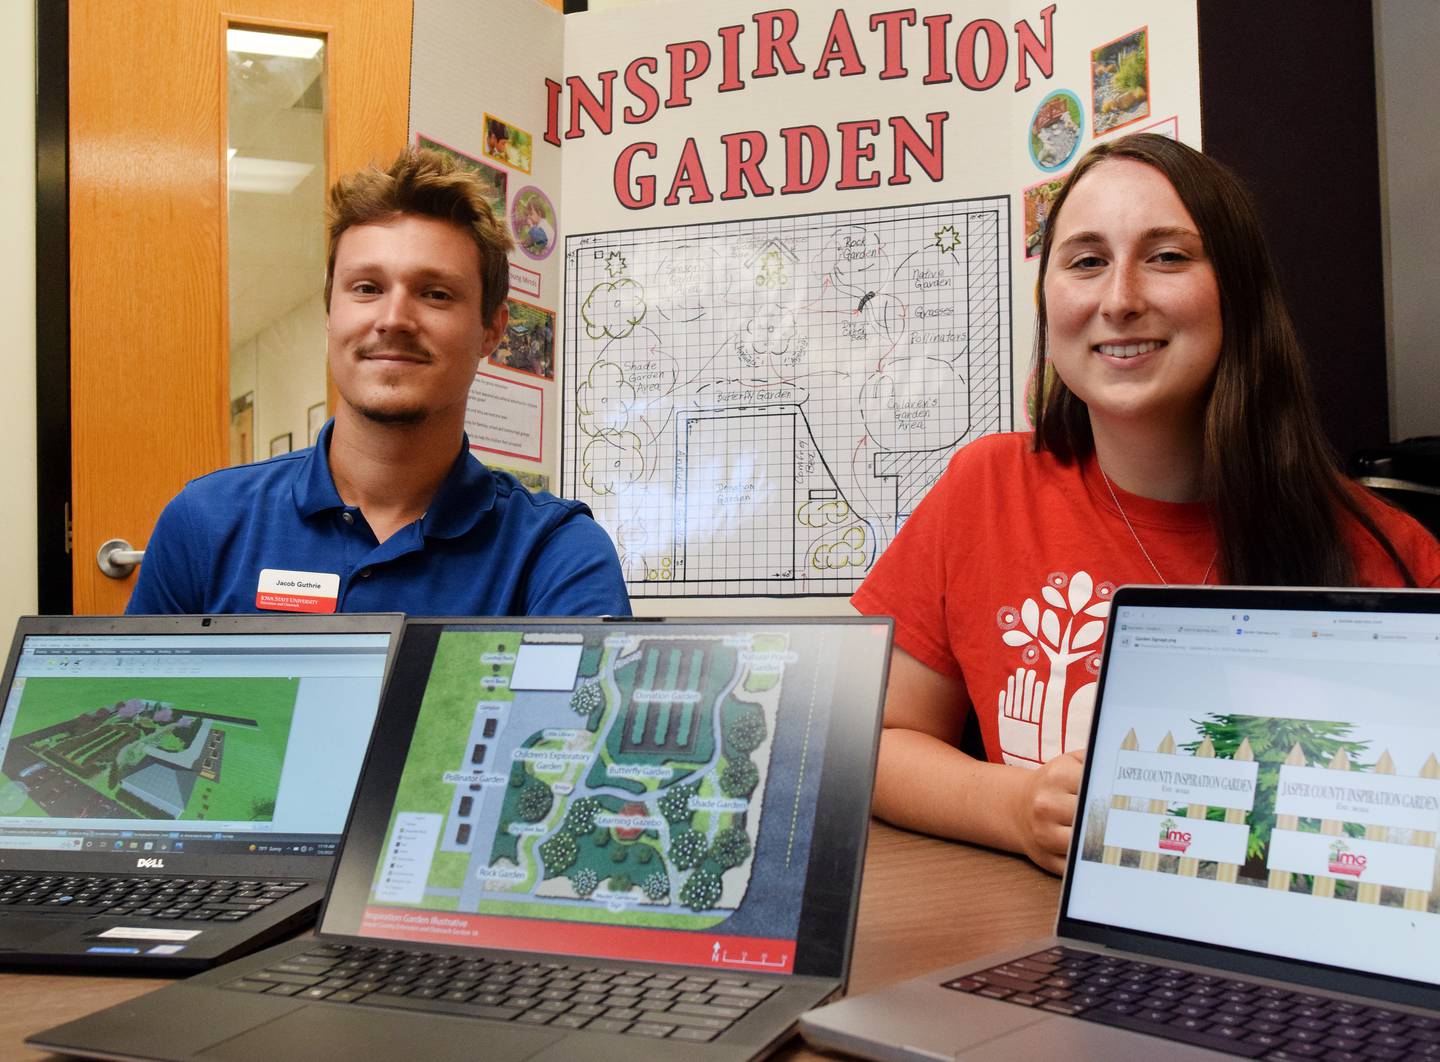 Iowa State University's Rising Star interns Jake Guthrie and Kaylee Kleitsch show off digital illustrations of how the Jasper County ISU Extension and Outreach office's community inspiration garden could look like when fully completed.